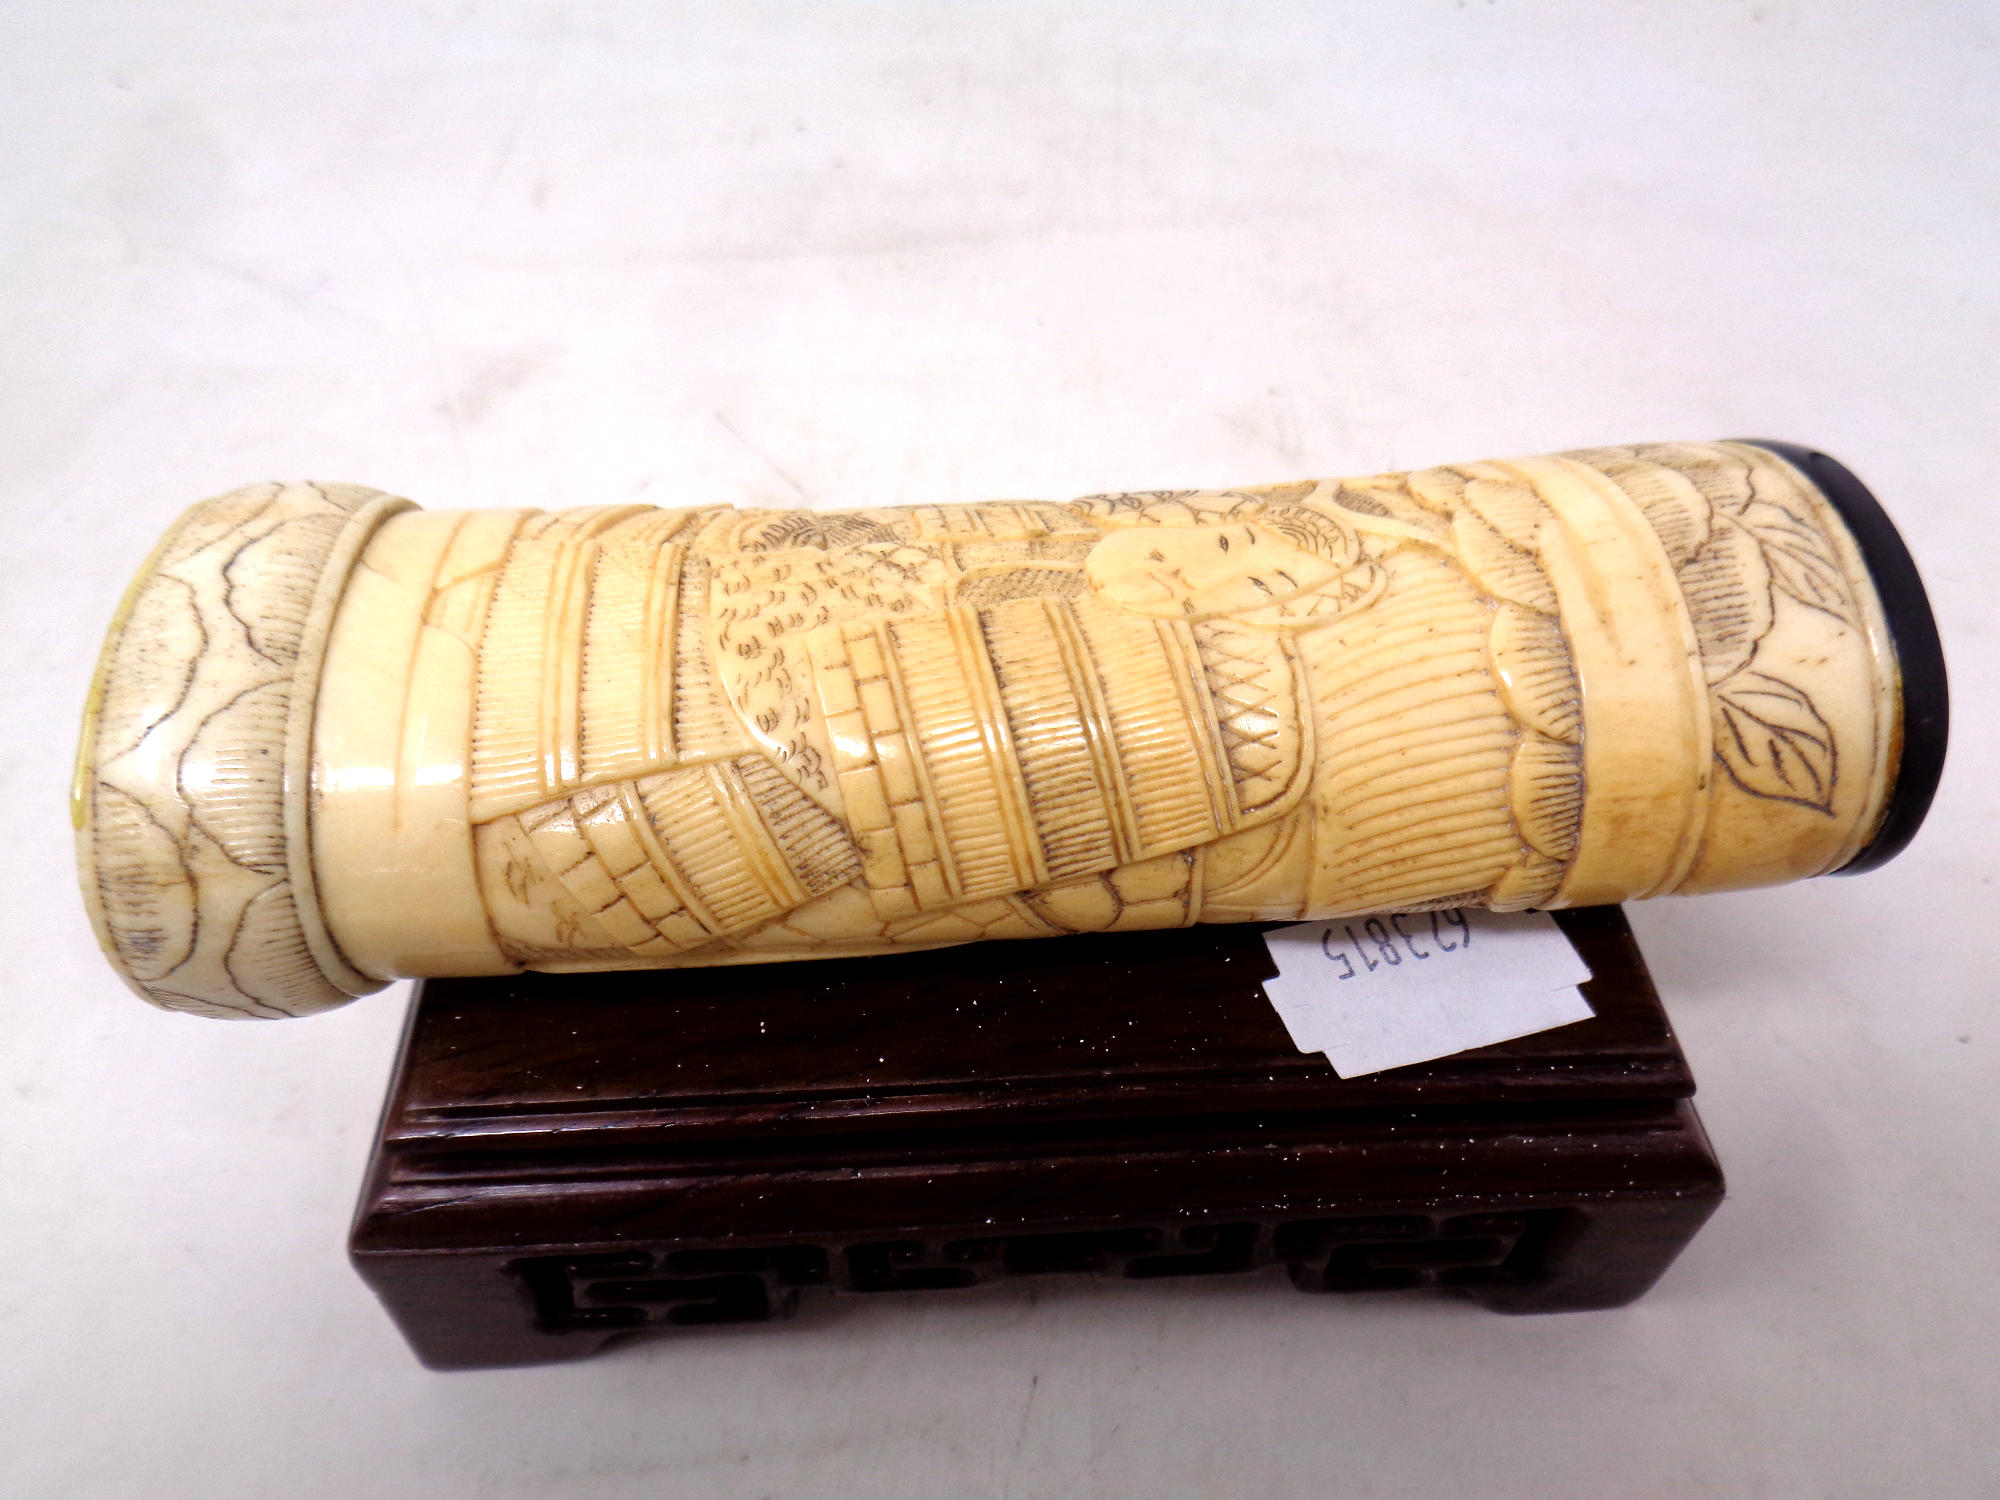 Three carved Japanese ivory and pen work netsuke on wooden stand together with a carved bone sword - Image 2 of 3